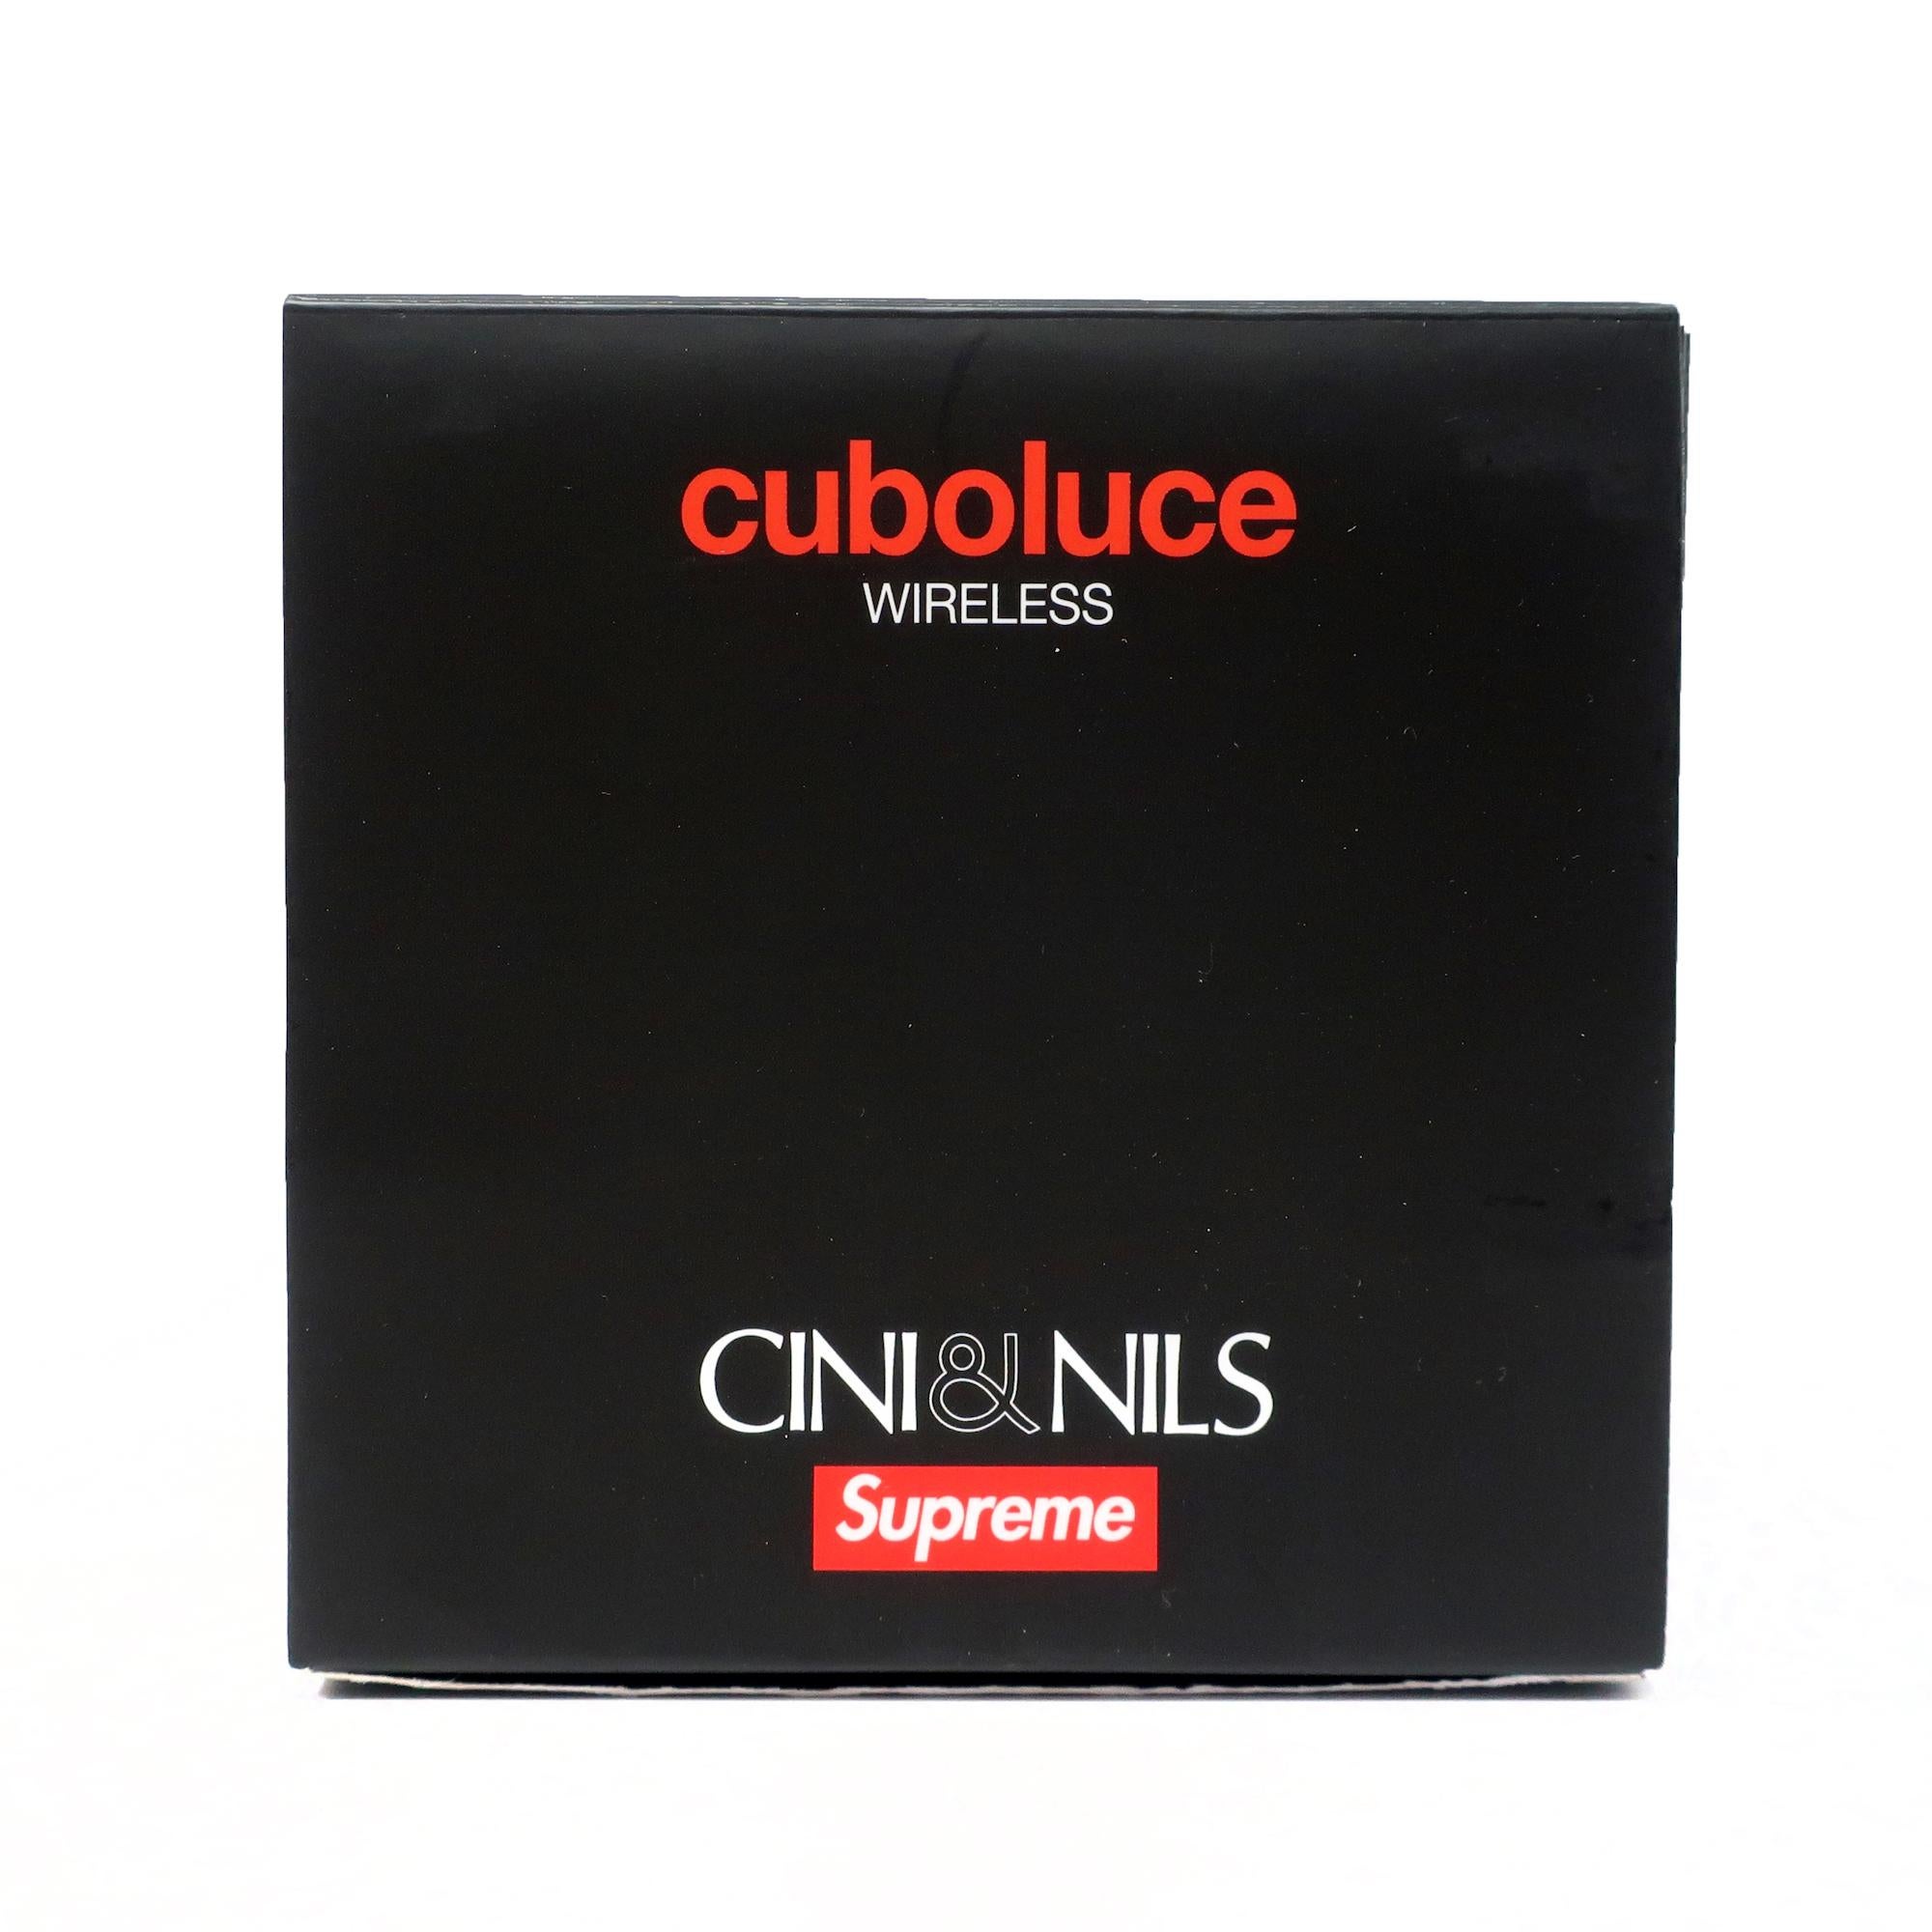 Supreme Cuboluce Wireless Table Lamp by Cini&Nils 1